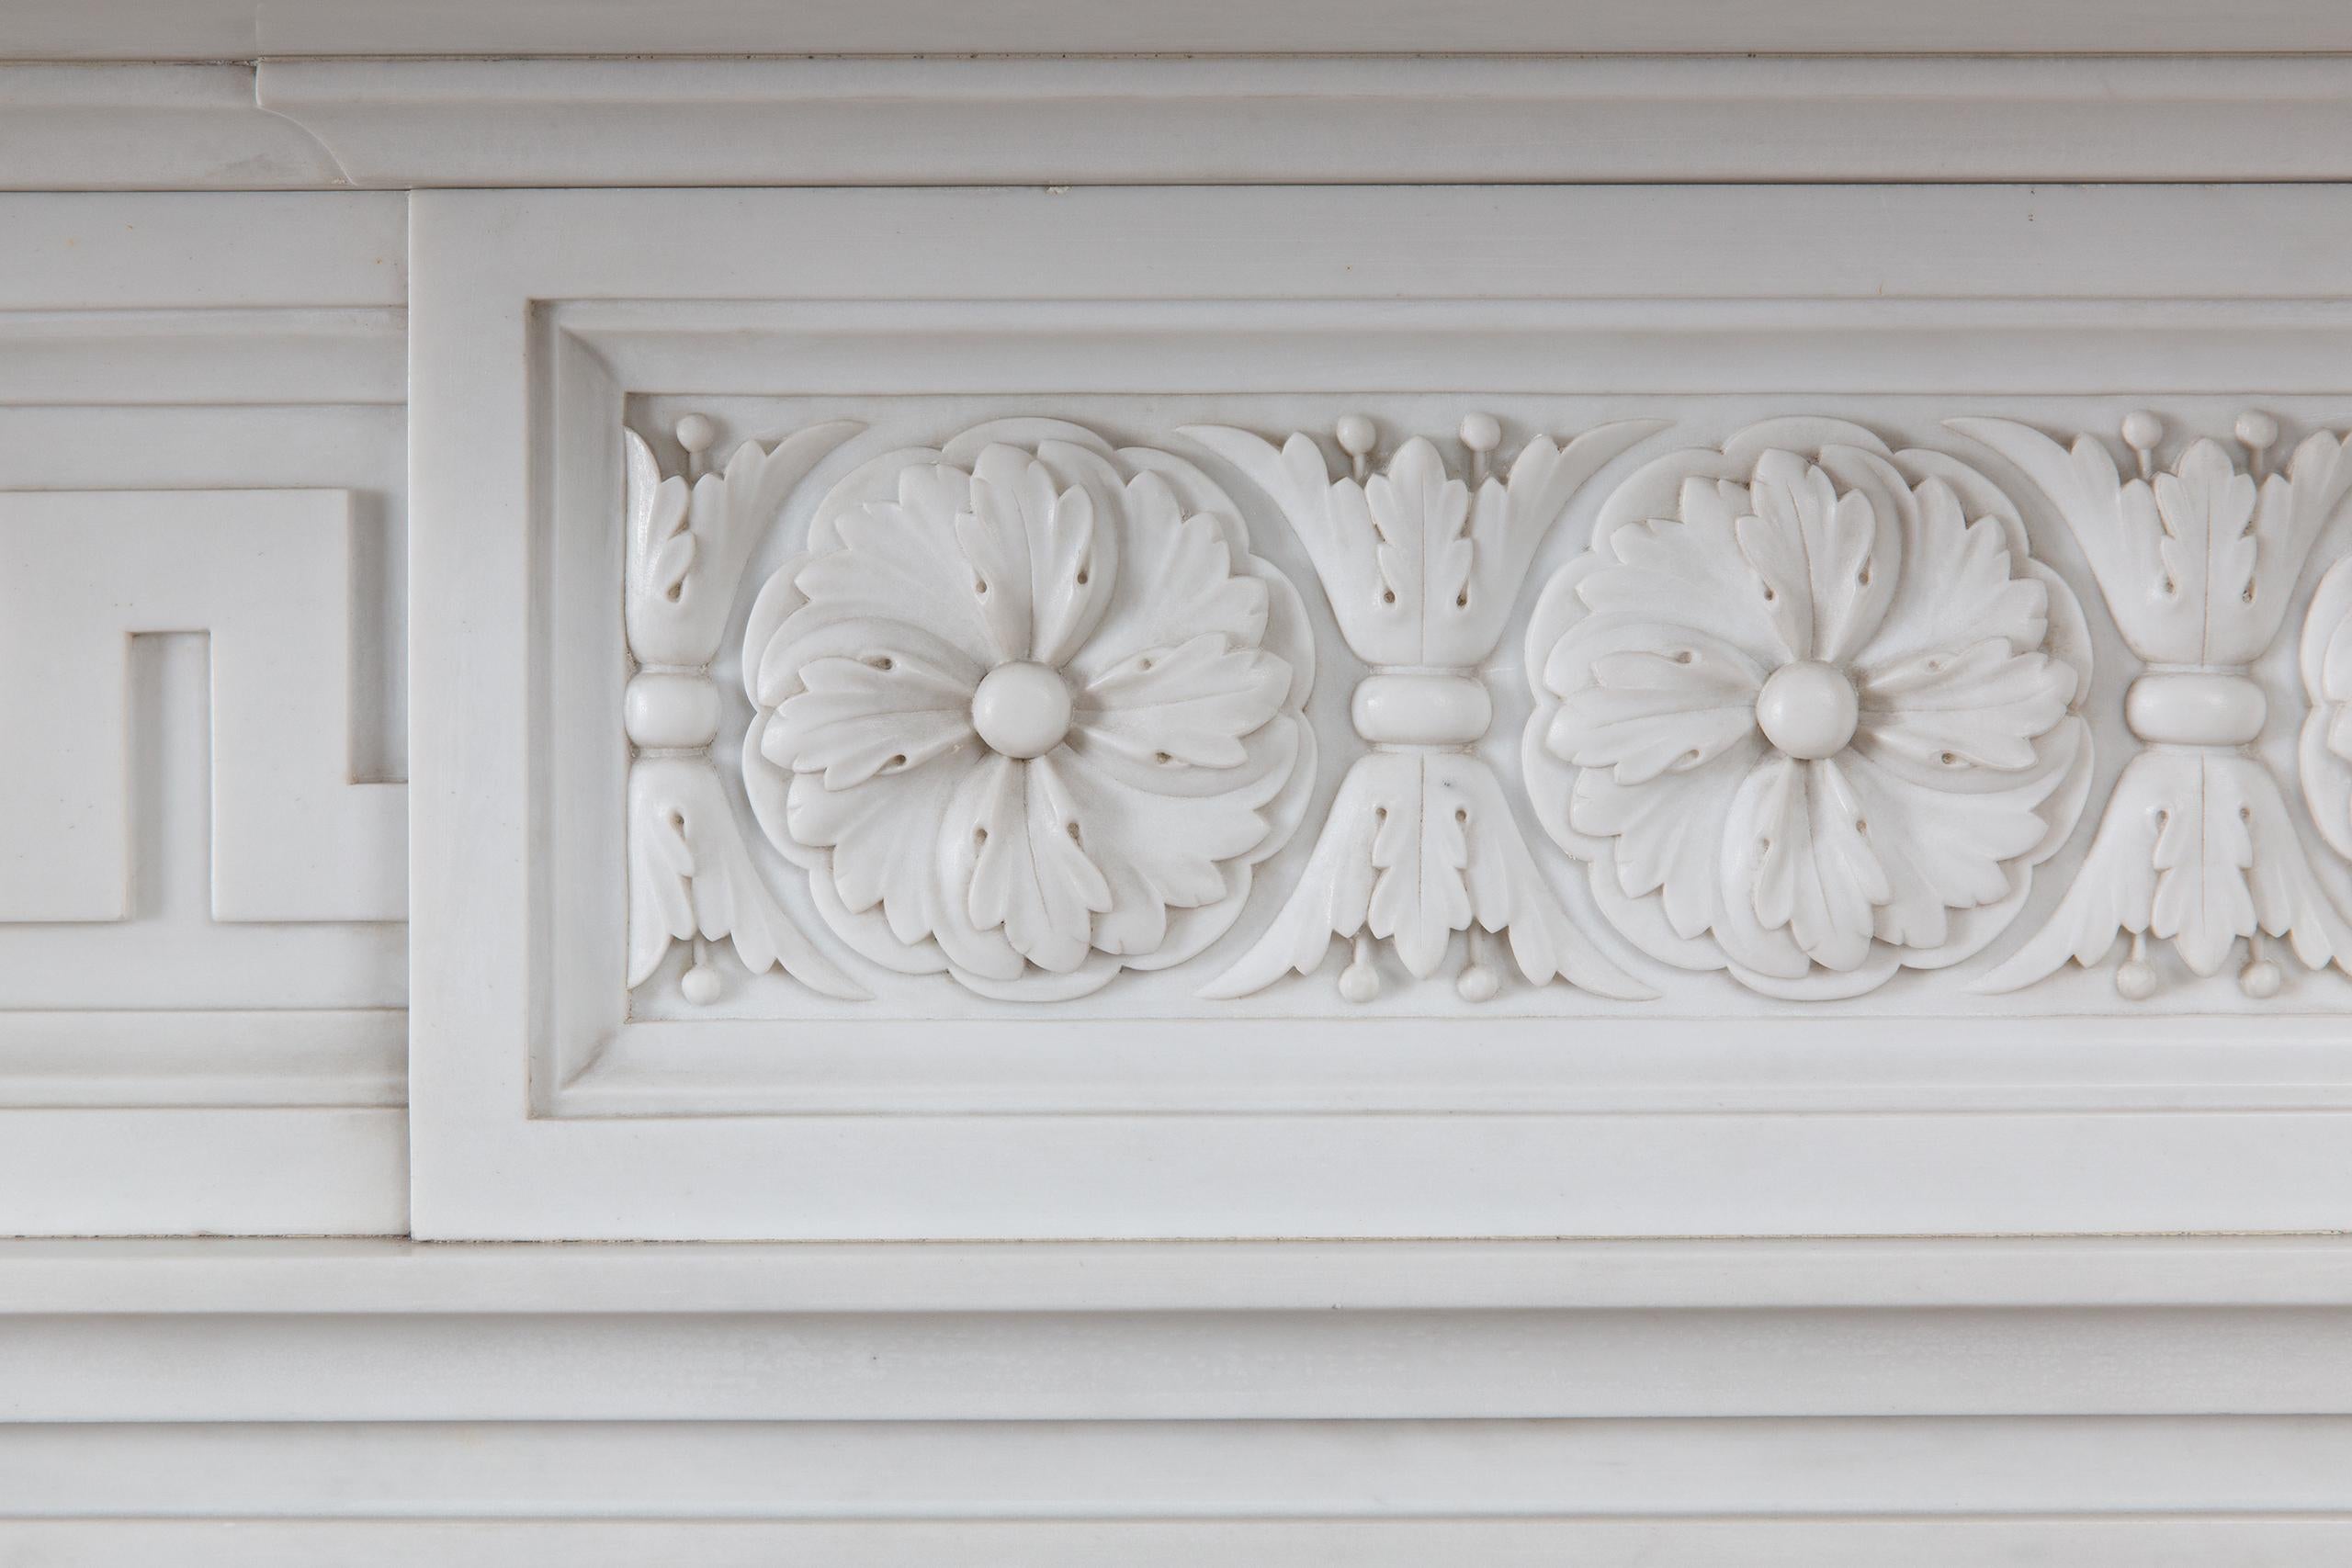 Very Rare Exceptional Statuary Clear White Marble Antique Fireplace Surround For Sale 5